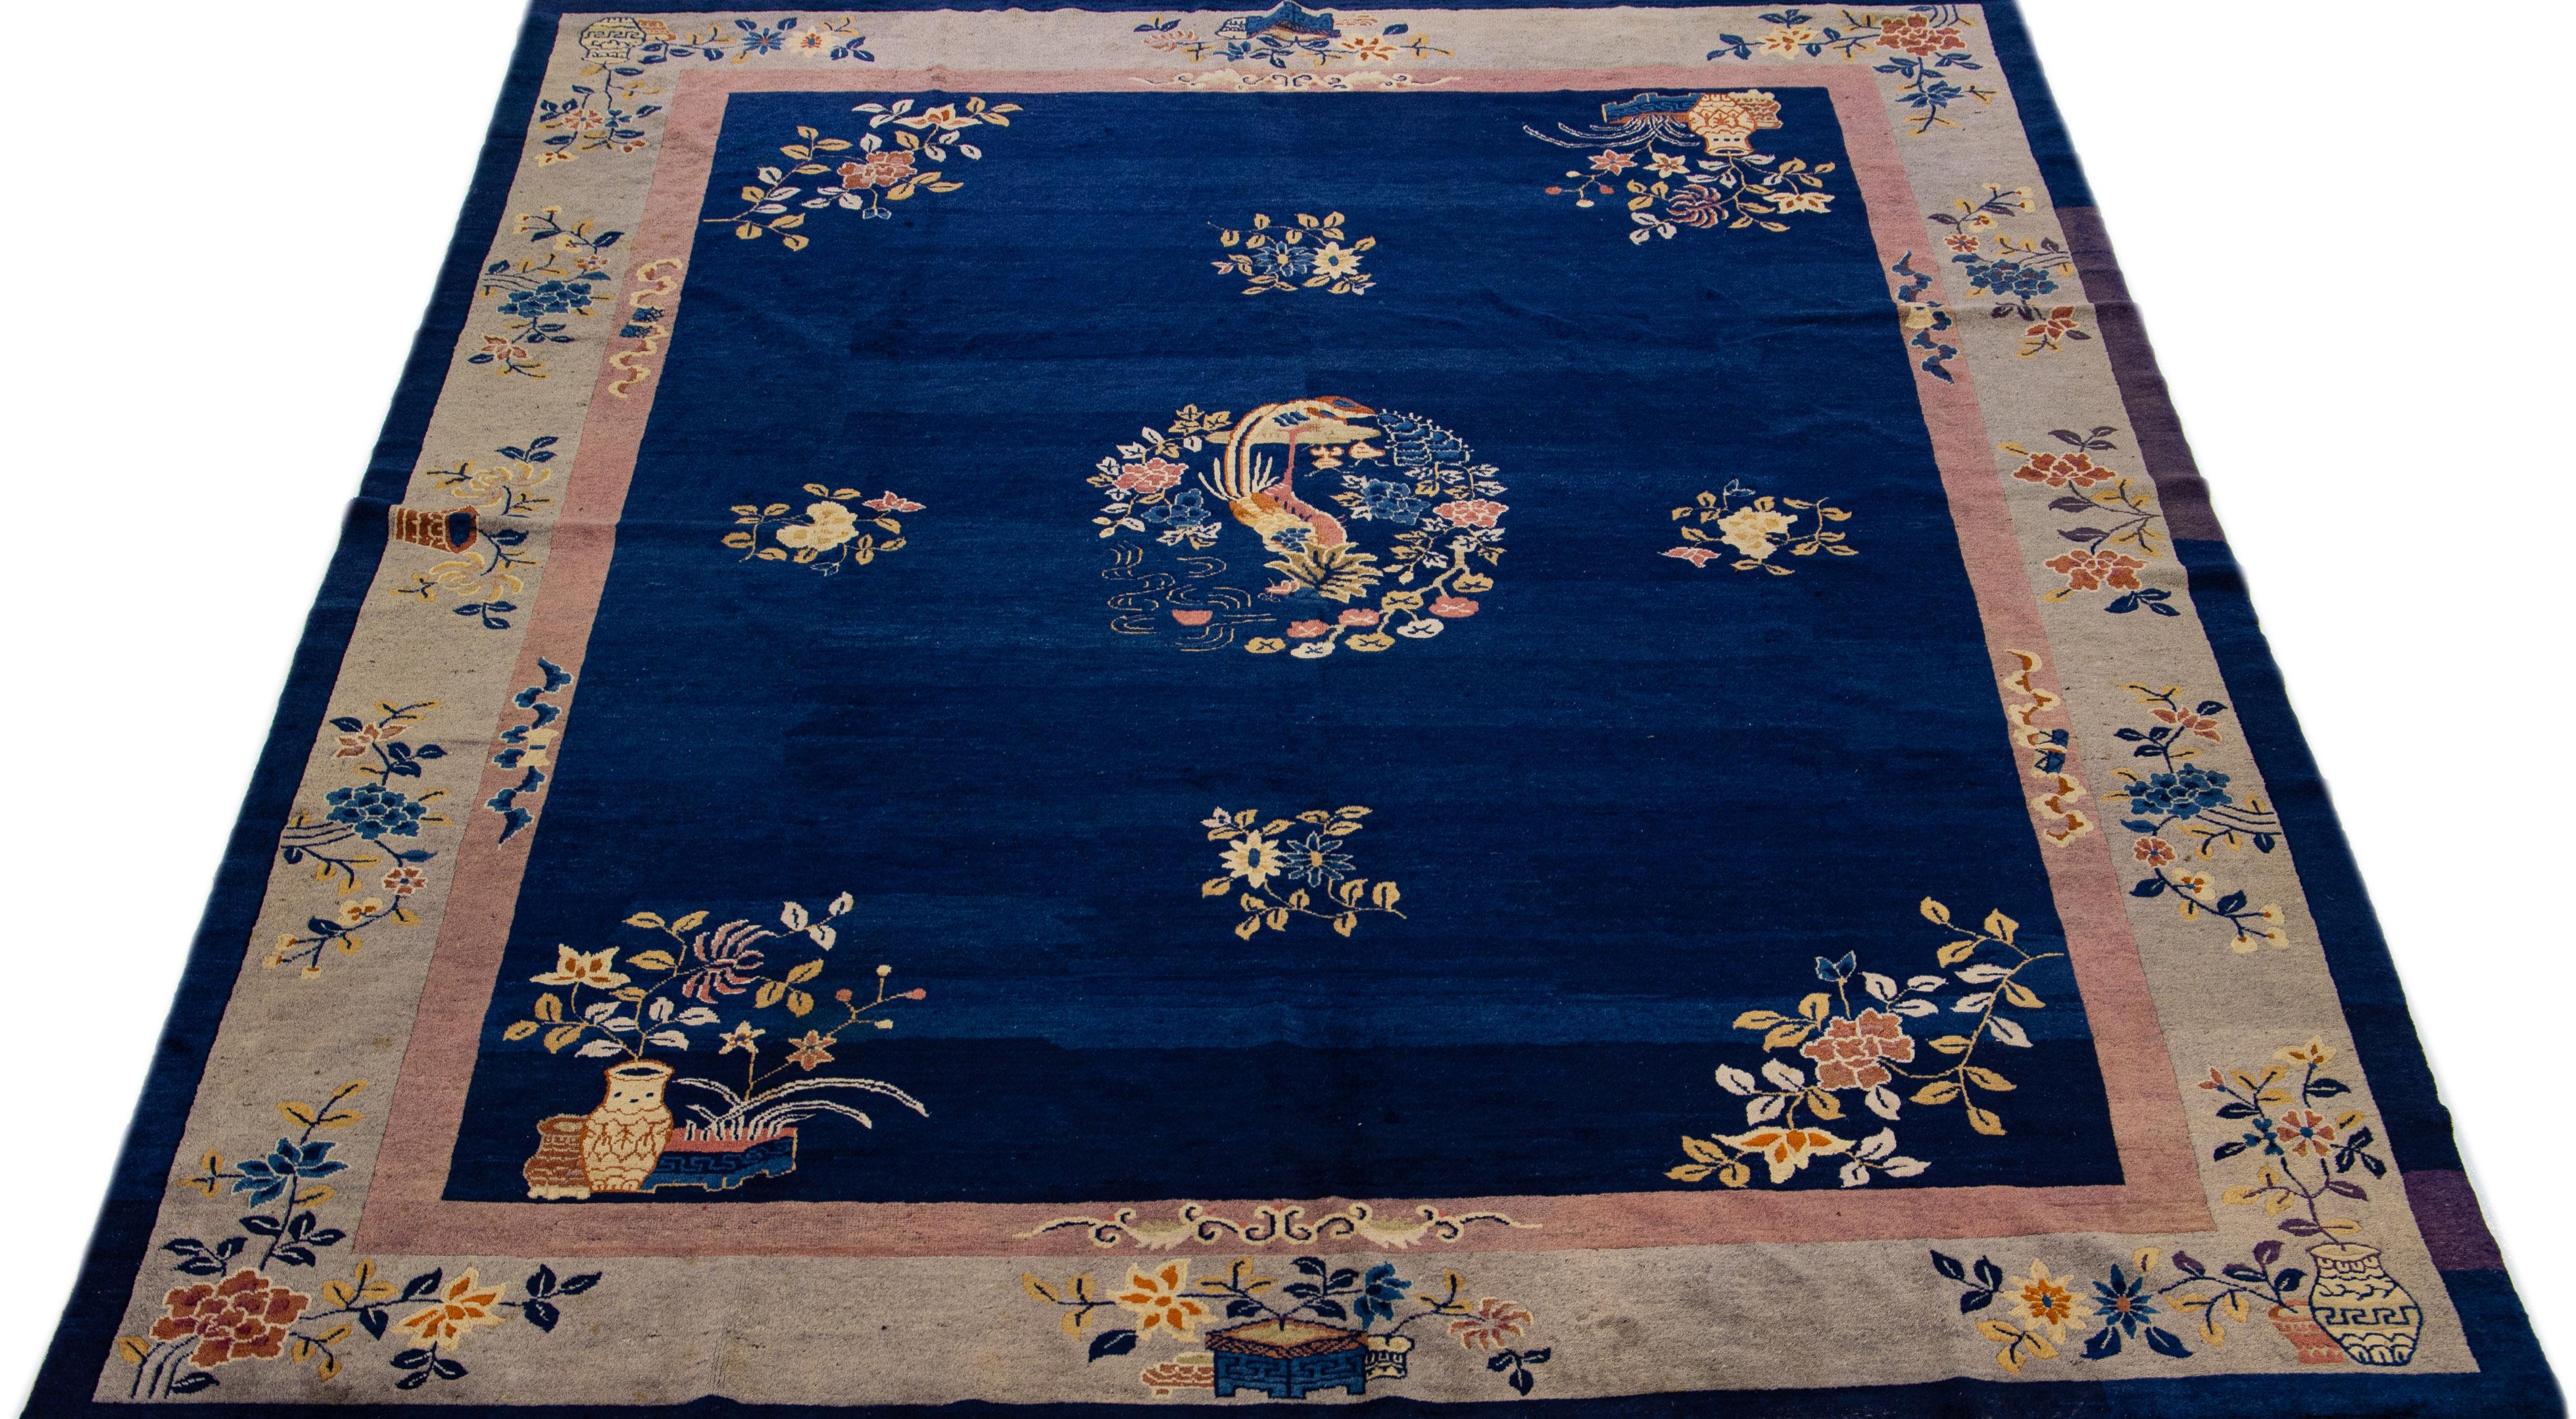 This luxurious antique Peking Chinese hand knotted wool rug features a navy blue field adorned with a designed frame and multi-colored accents in a stunning all-over Chinese floral motif.

This rug measures: 9' x 11'7